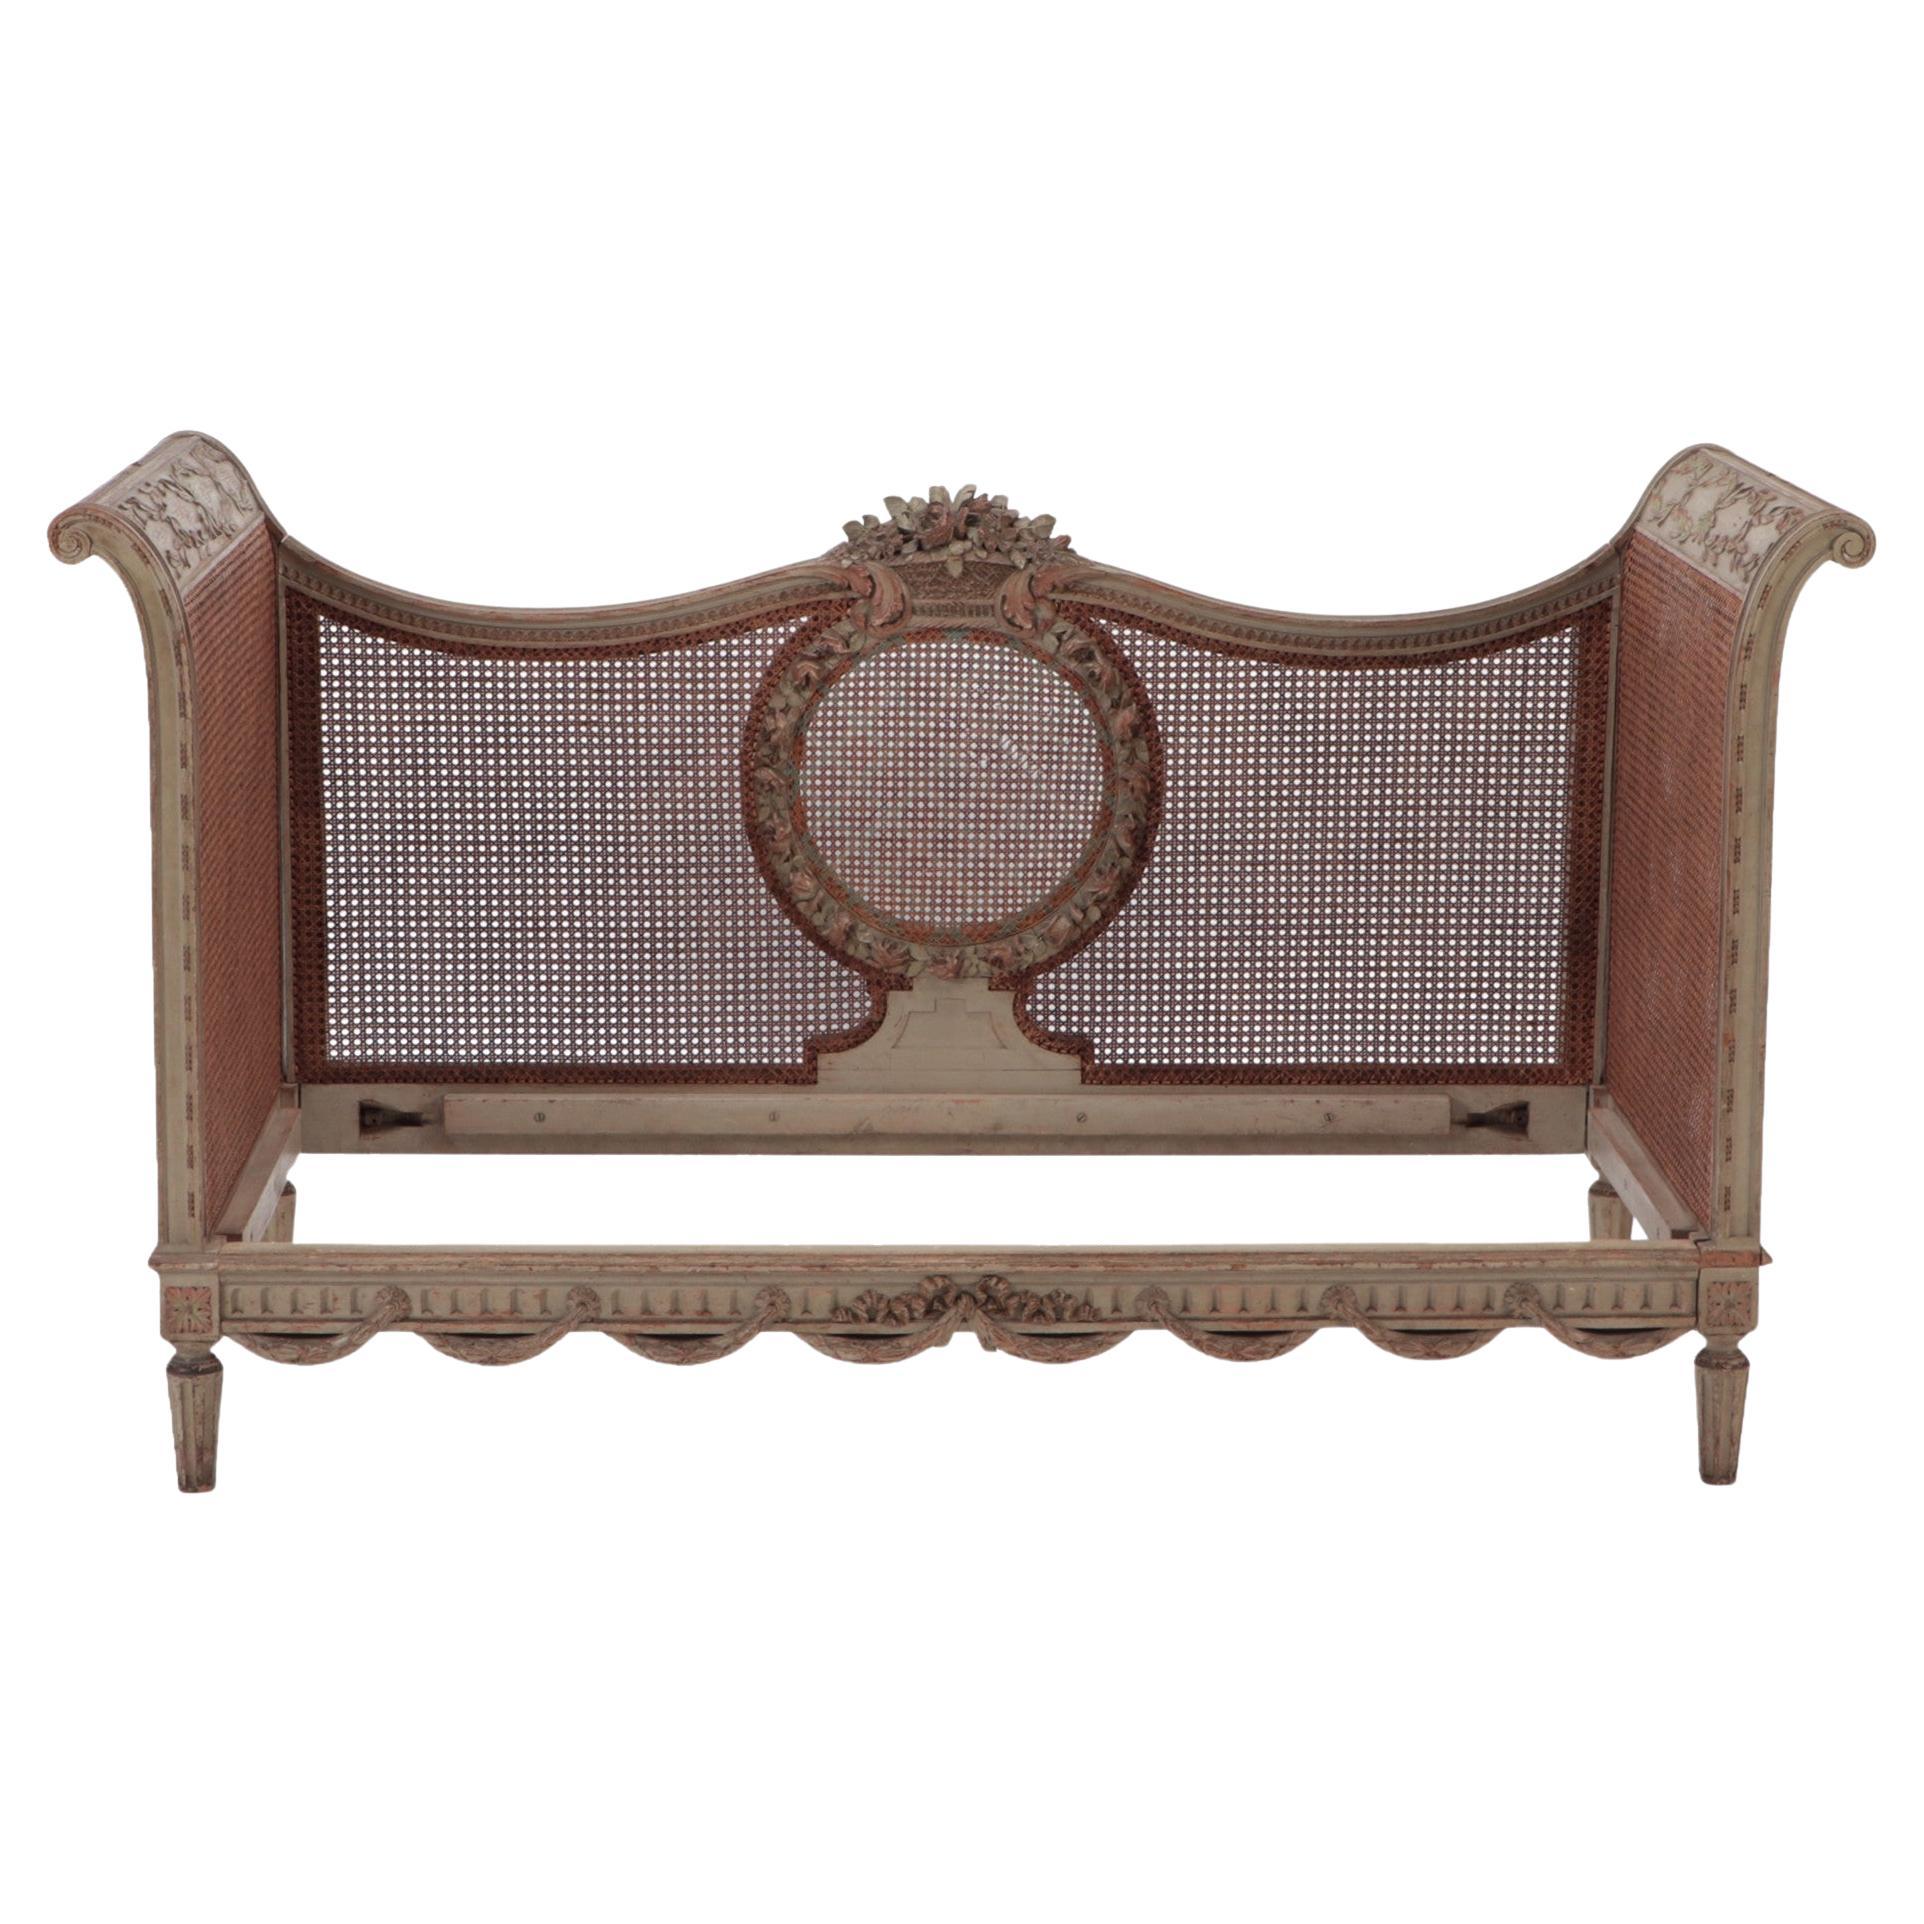 Late 19th Century French Directoire Painted Cane Daybed/Settee, C 1880